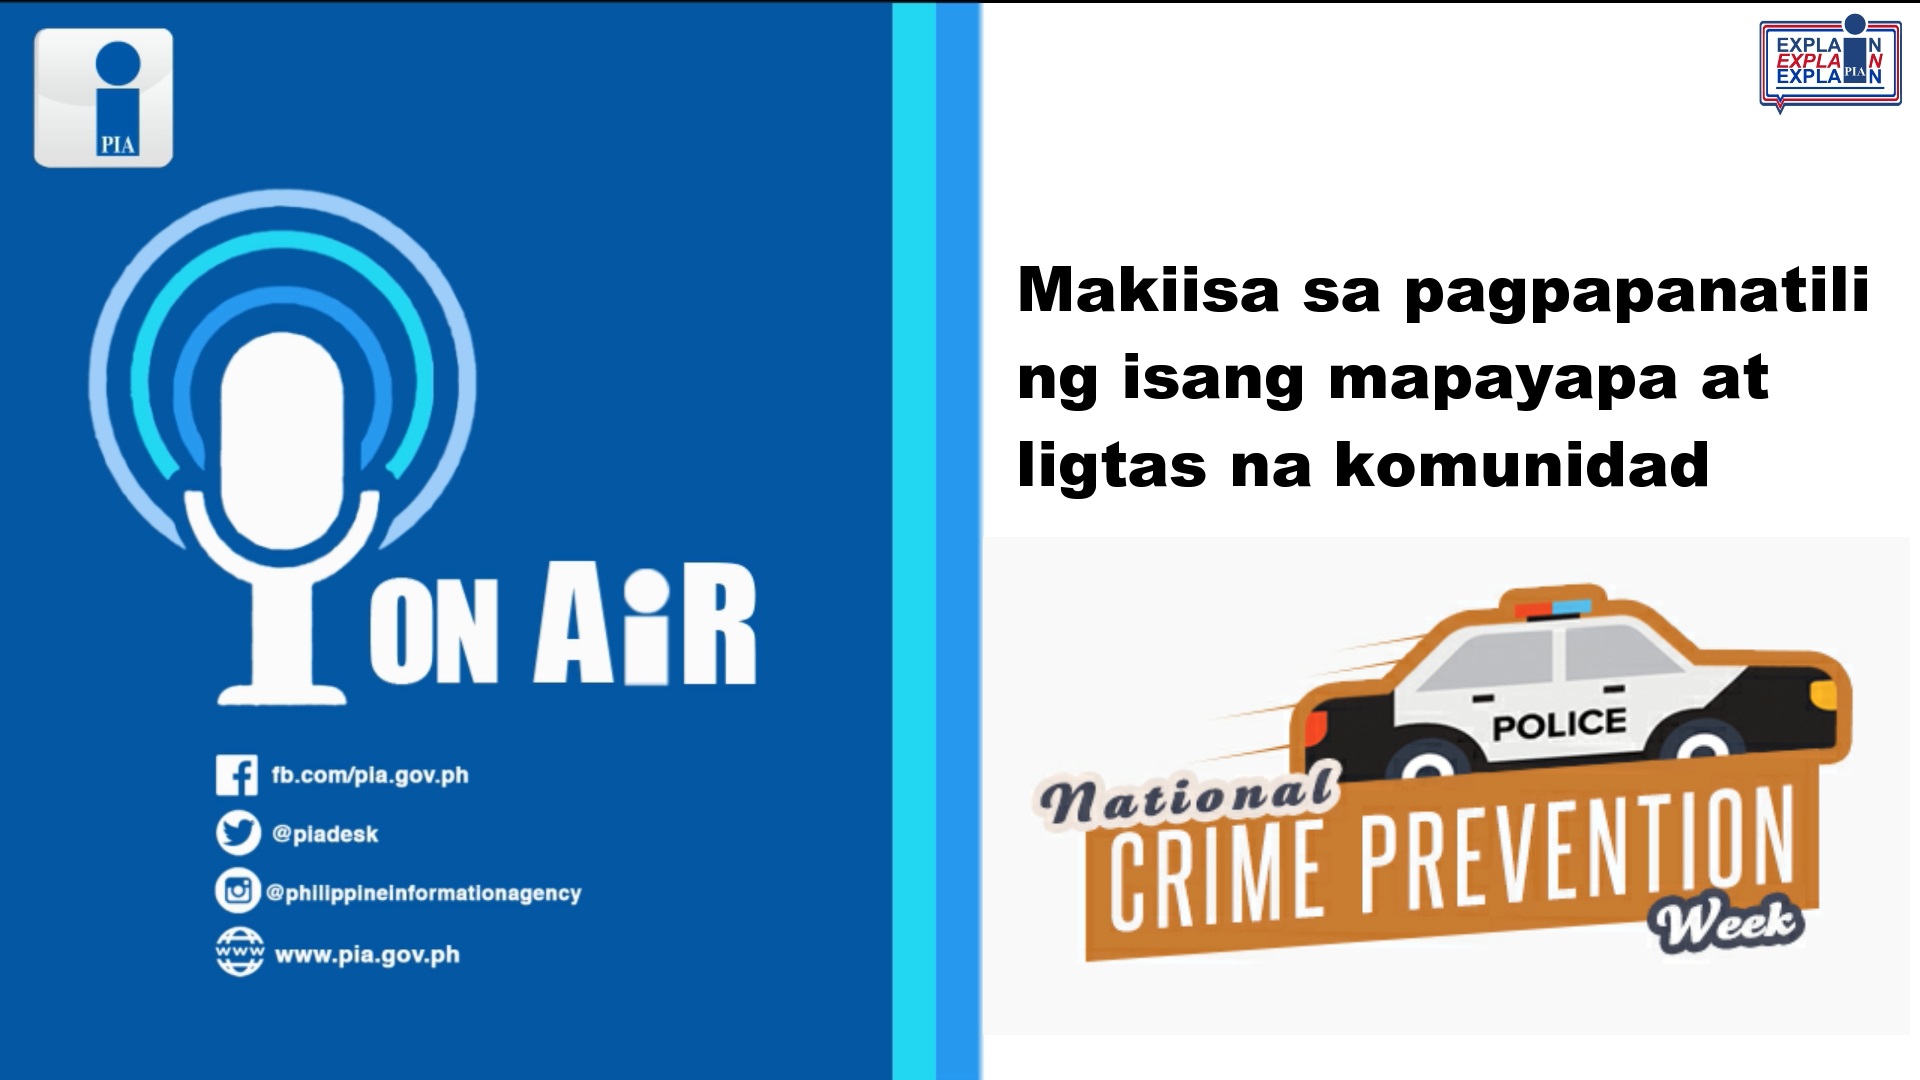 PIA ON AIR | National Crime Prevention Week